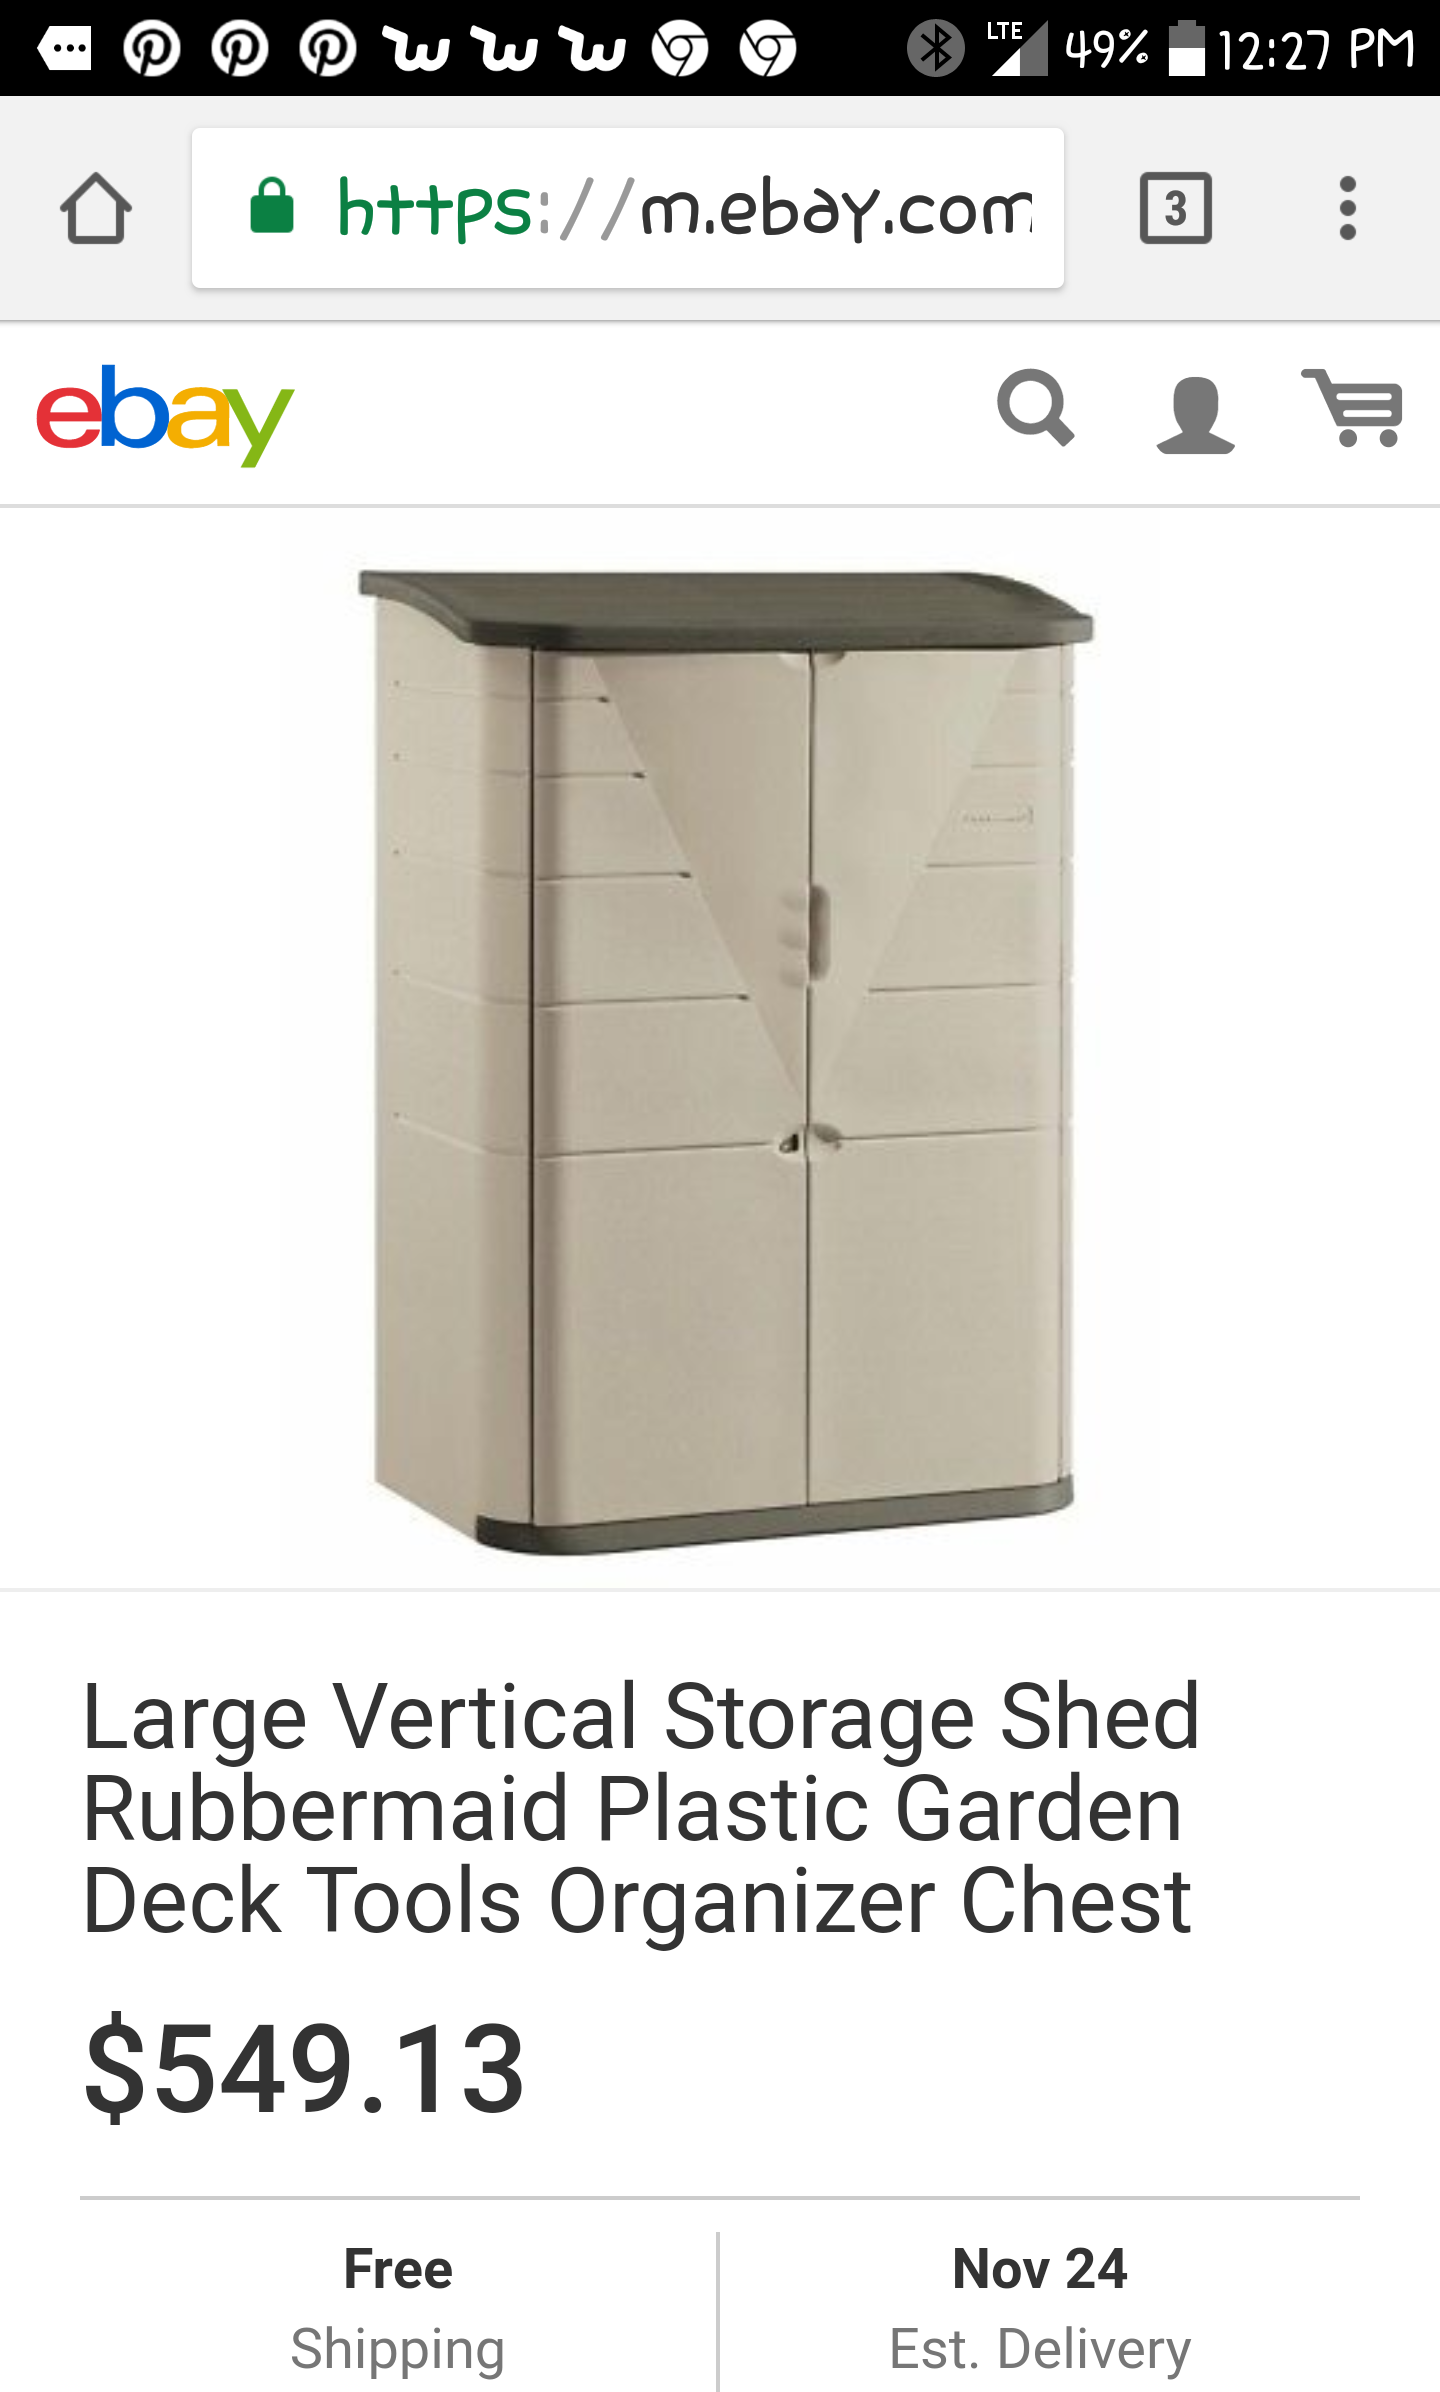 Rubbermaid Storage Shed 52% Off Today Only! - Mommies with Cents